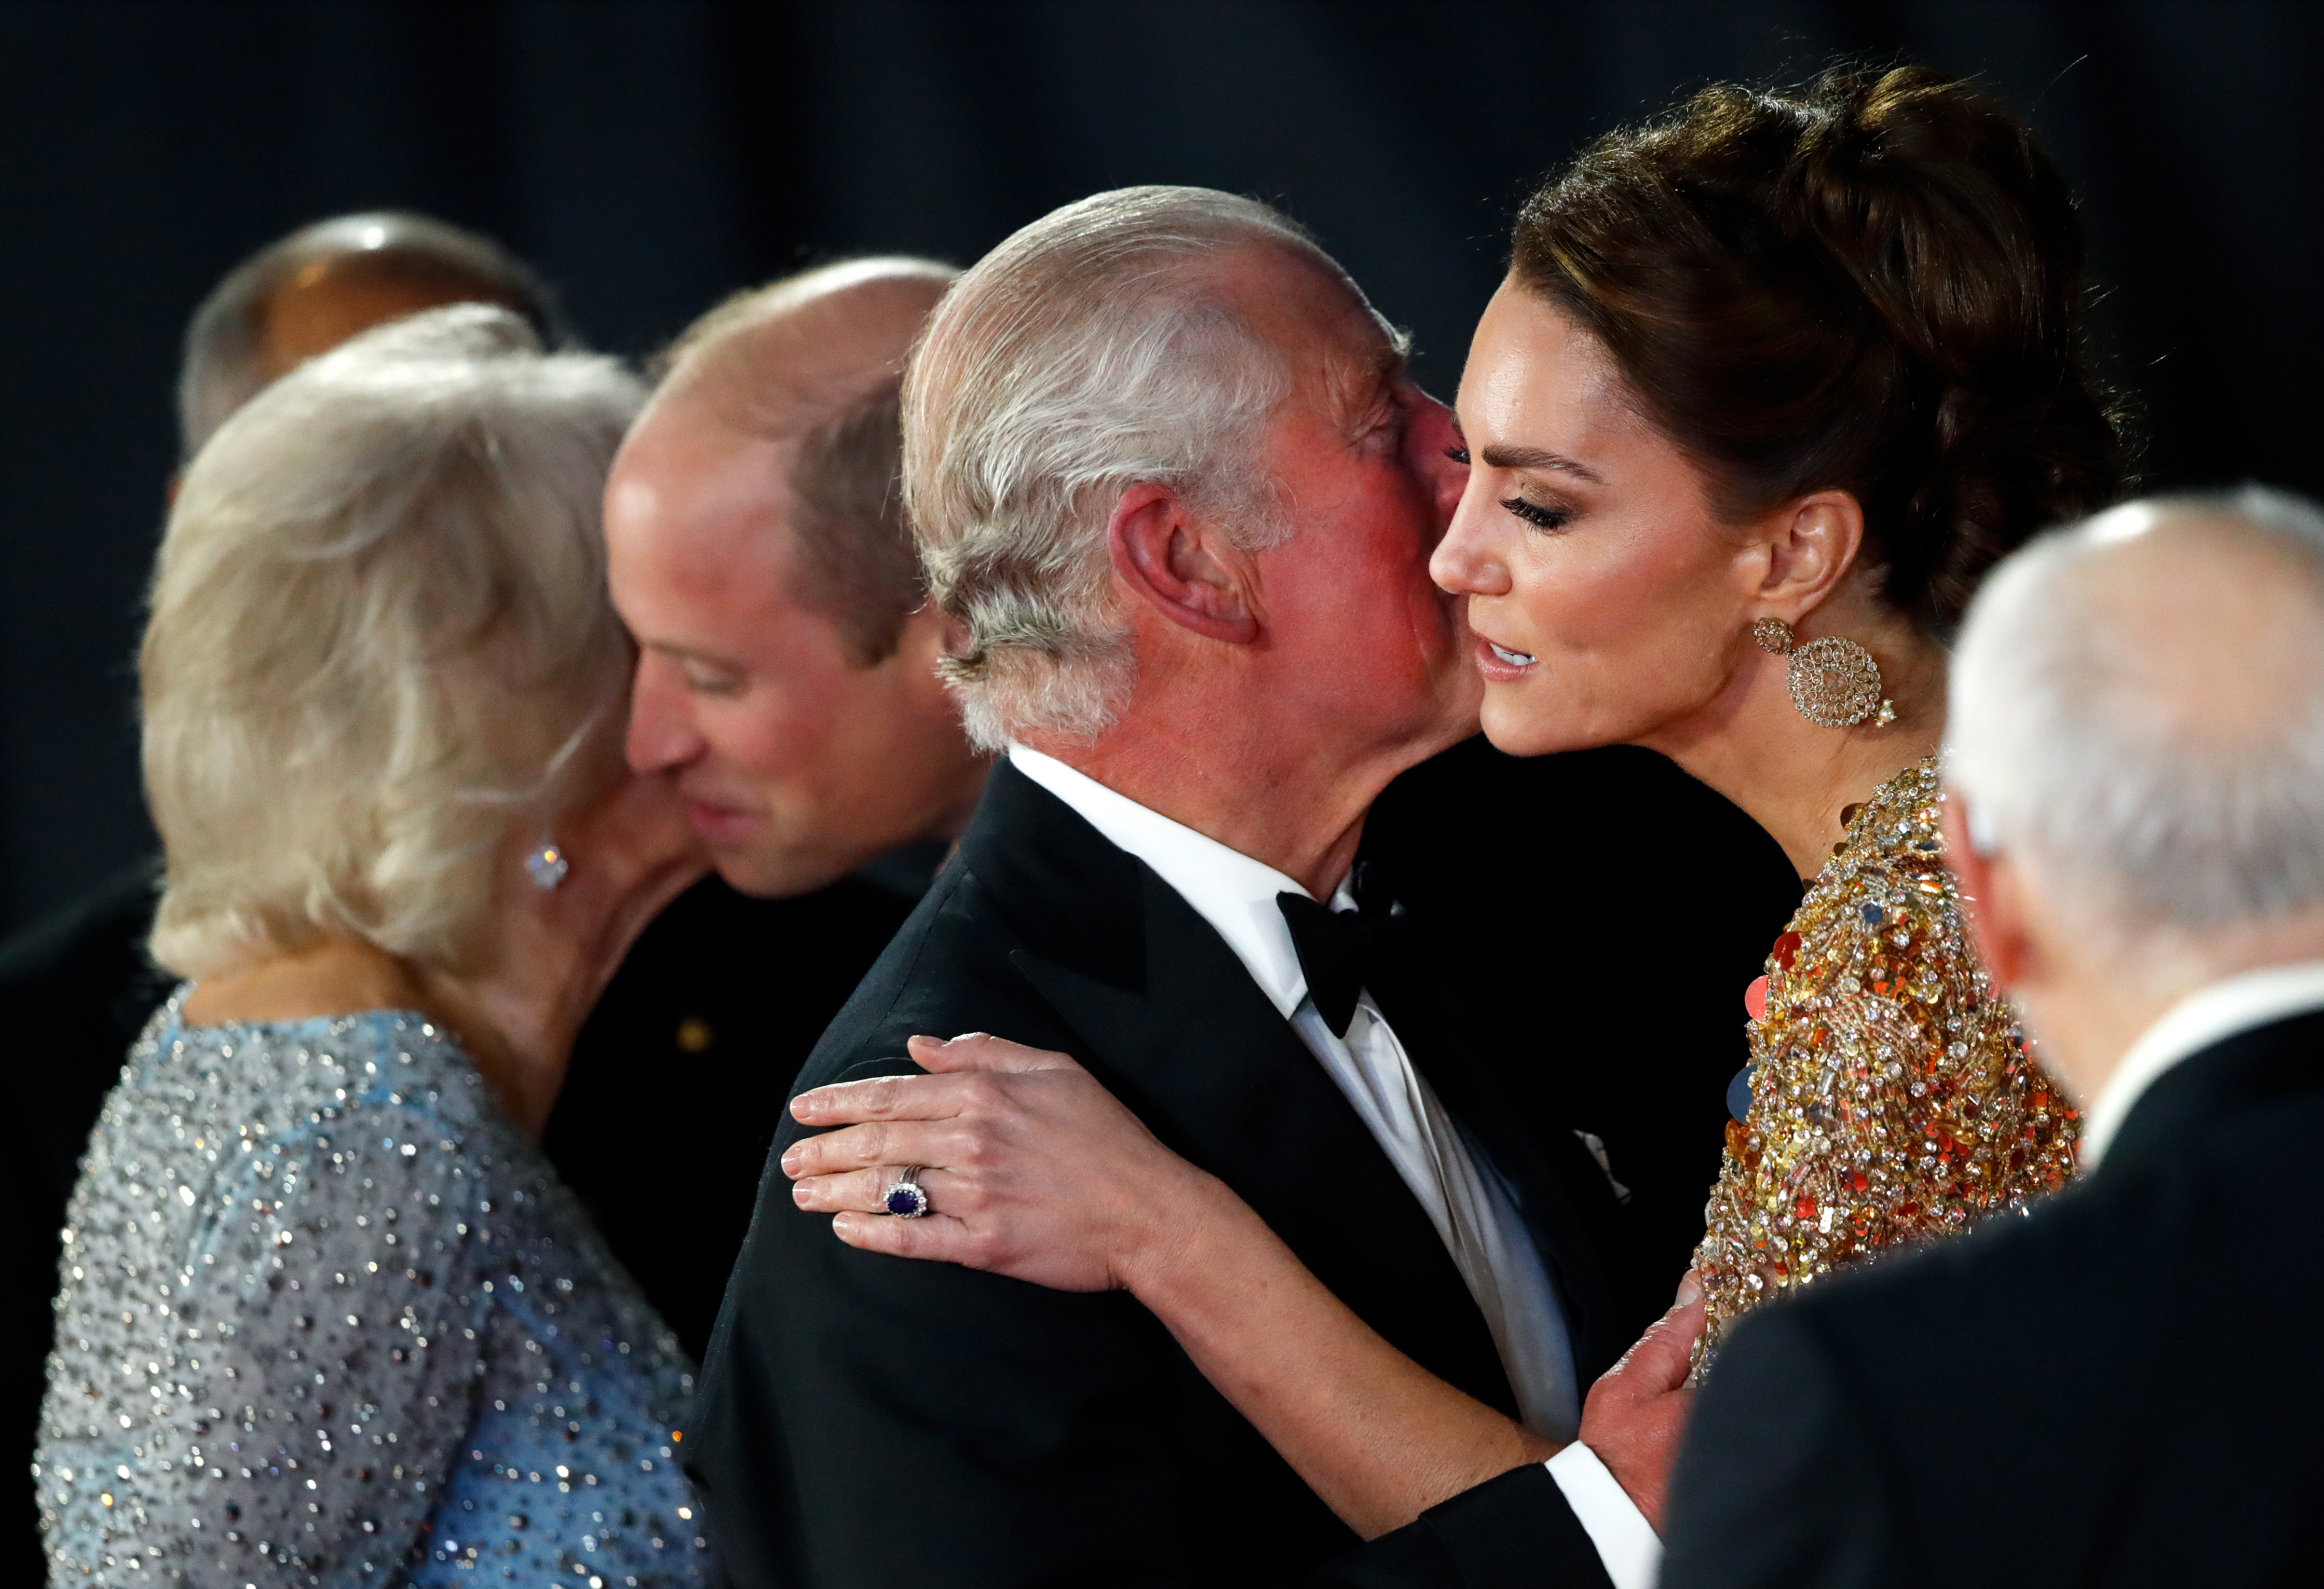 Kate recently met with Charles for a heart-to-heart